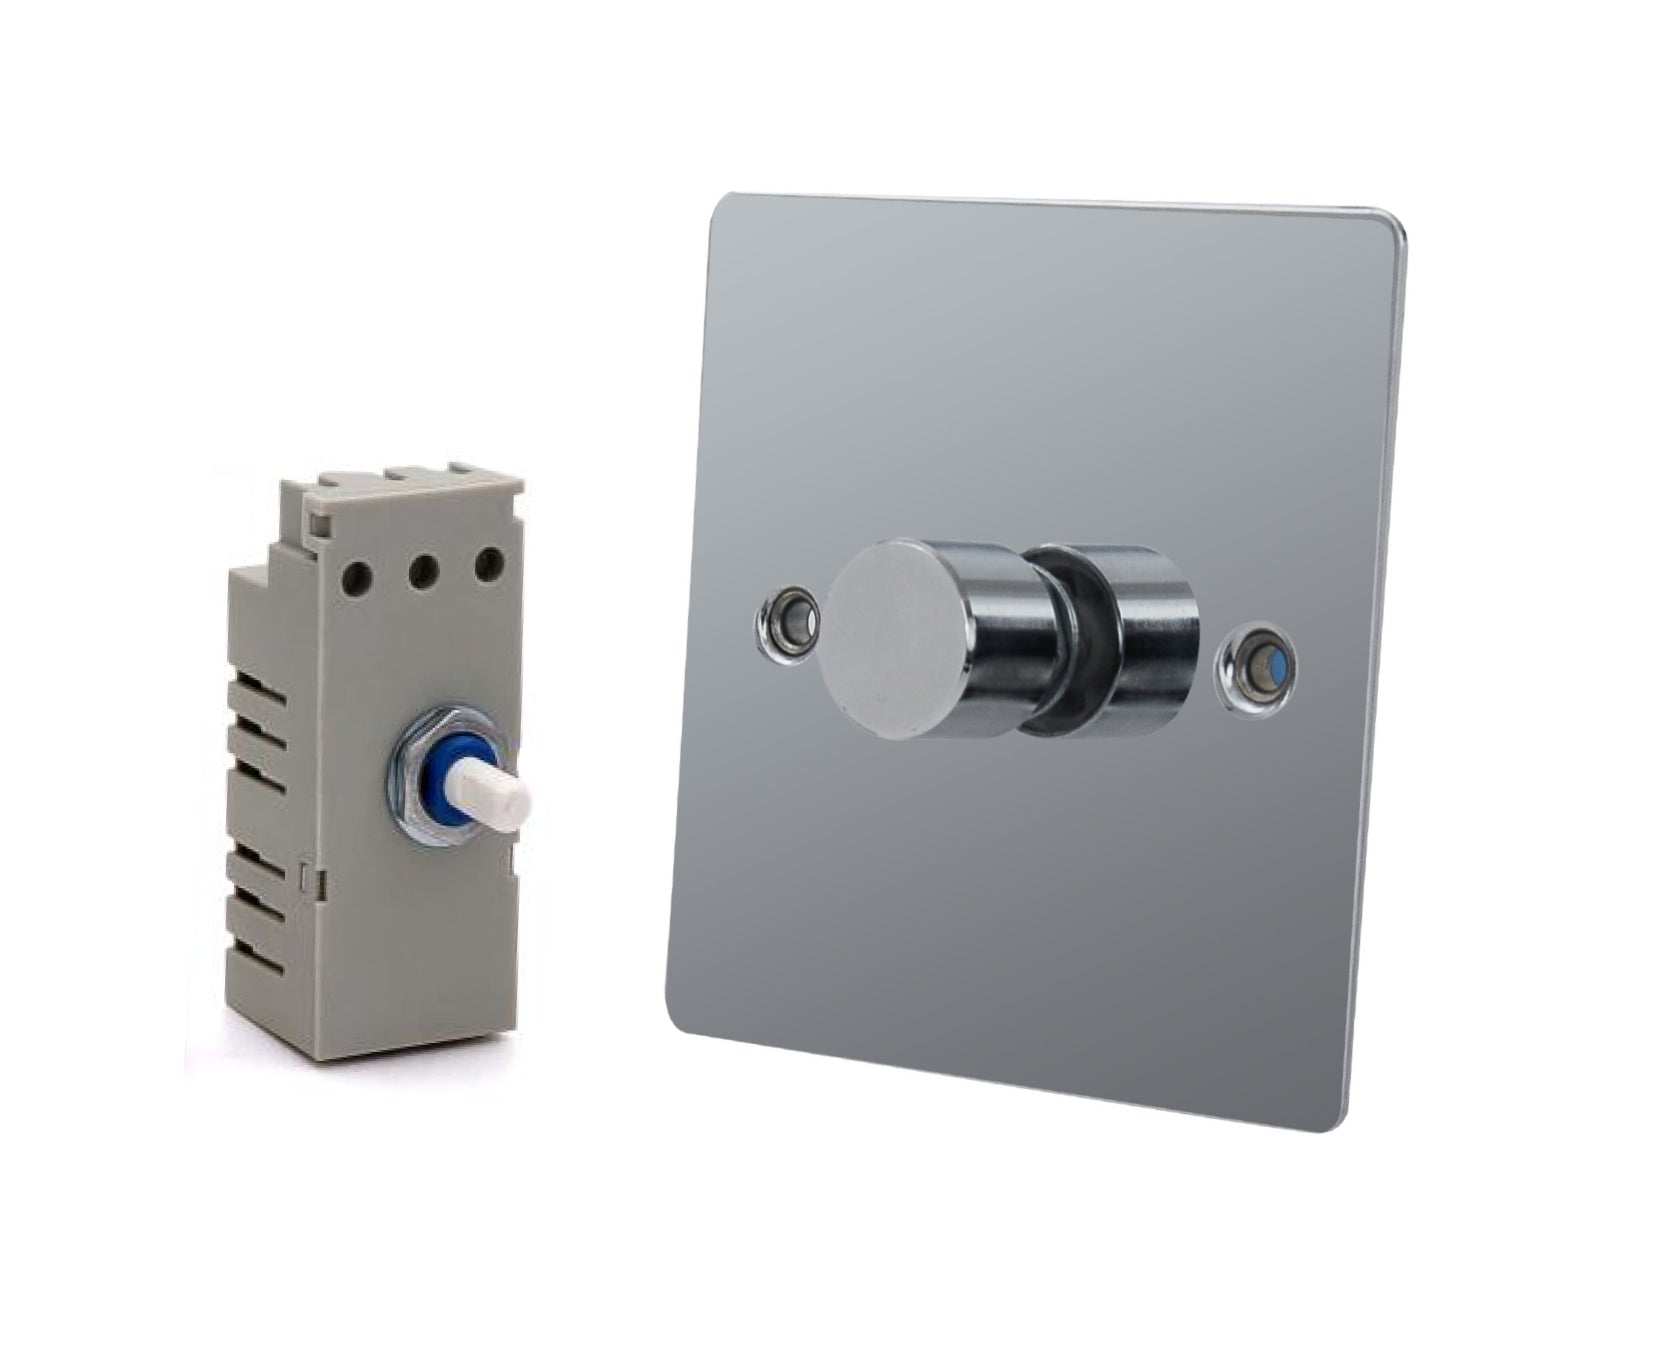 FluxTech - LED Dimmer Switch - Trailing Edge Phase Control